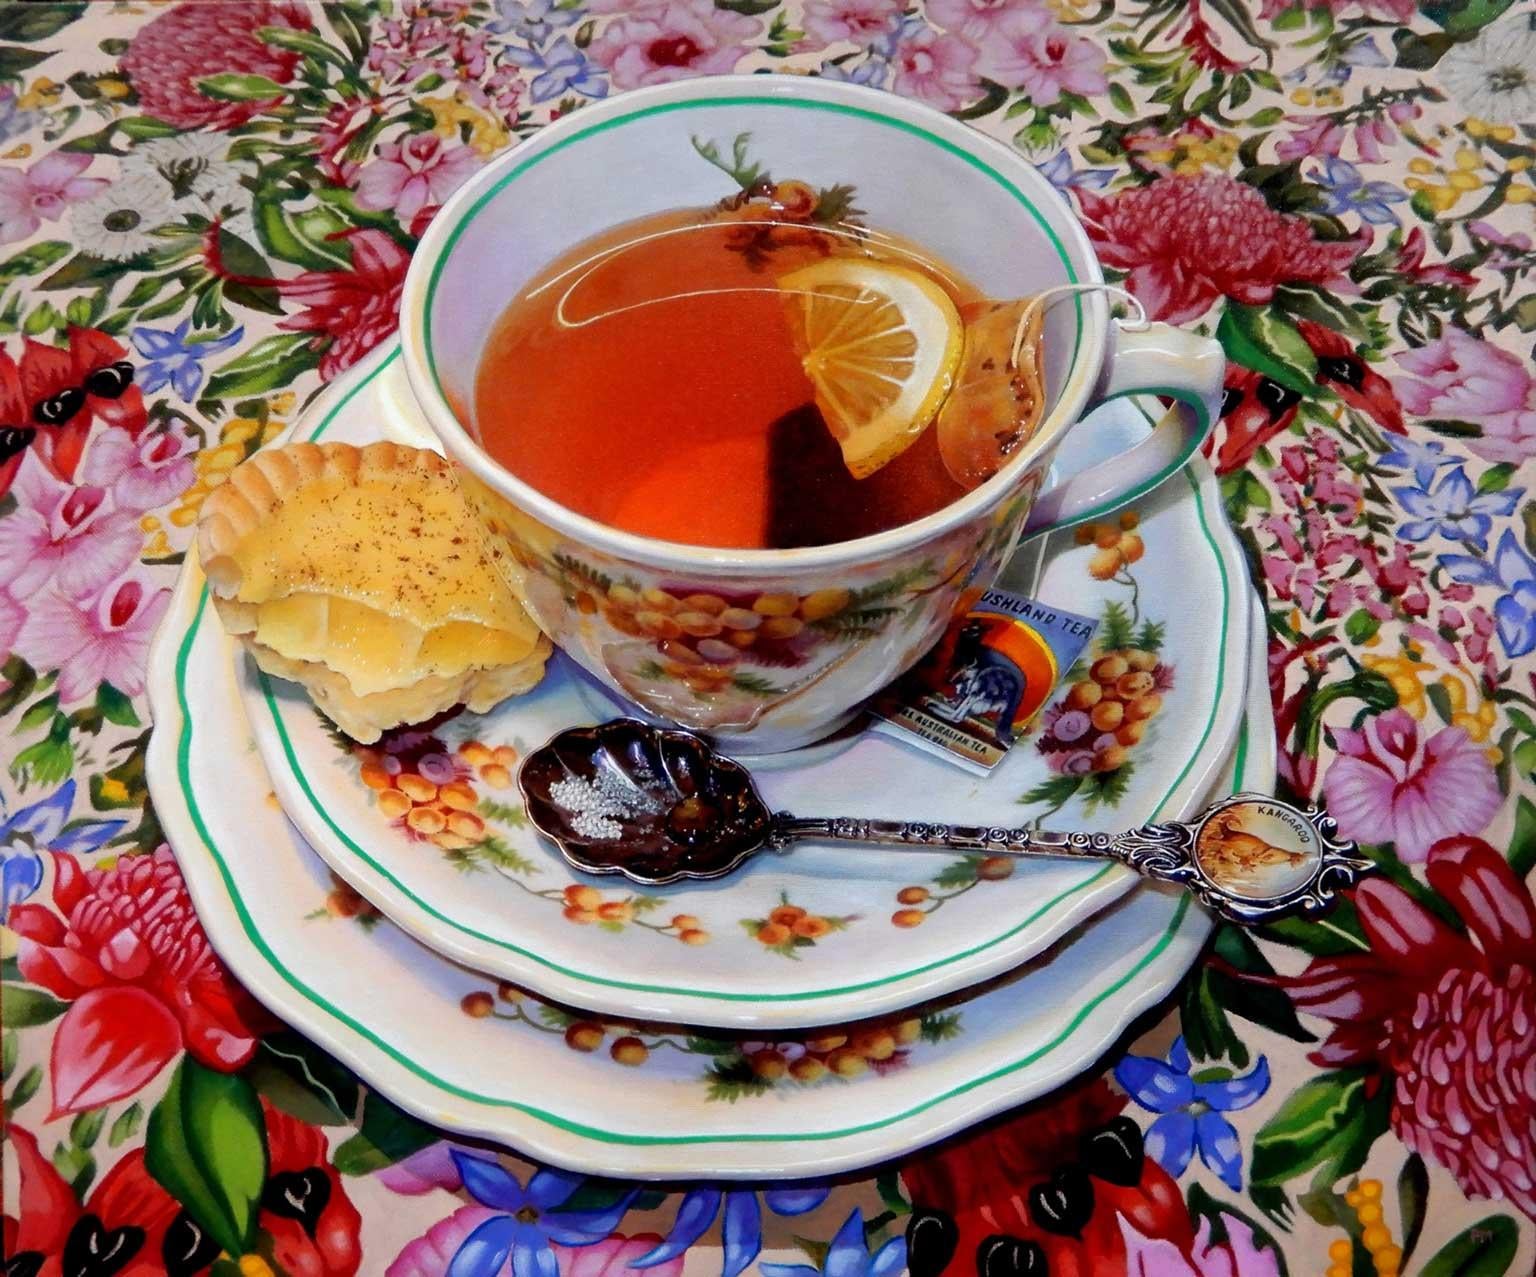 Wattle and Custard Tart is a continuation of my ongoing tea cup theme, and a part of my Australiana series. This series pairs Australian flora themed fabrics with classic Aussie biscuits. Even the tea used is Australian themed - in this case,